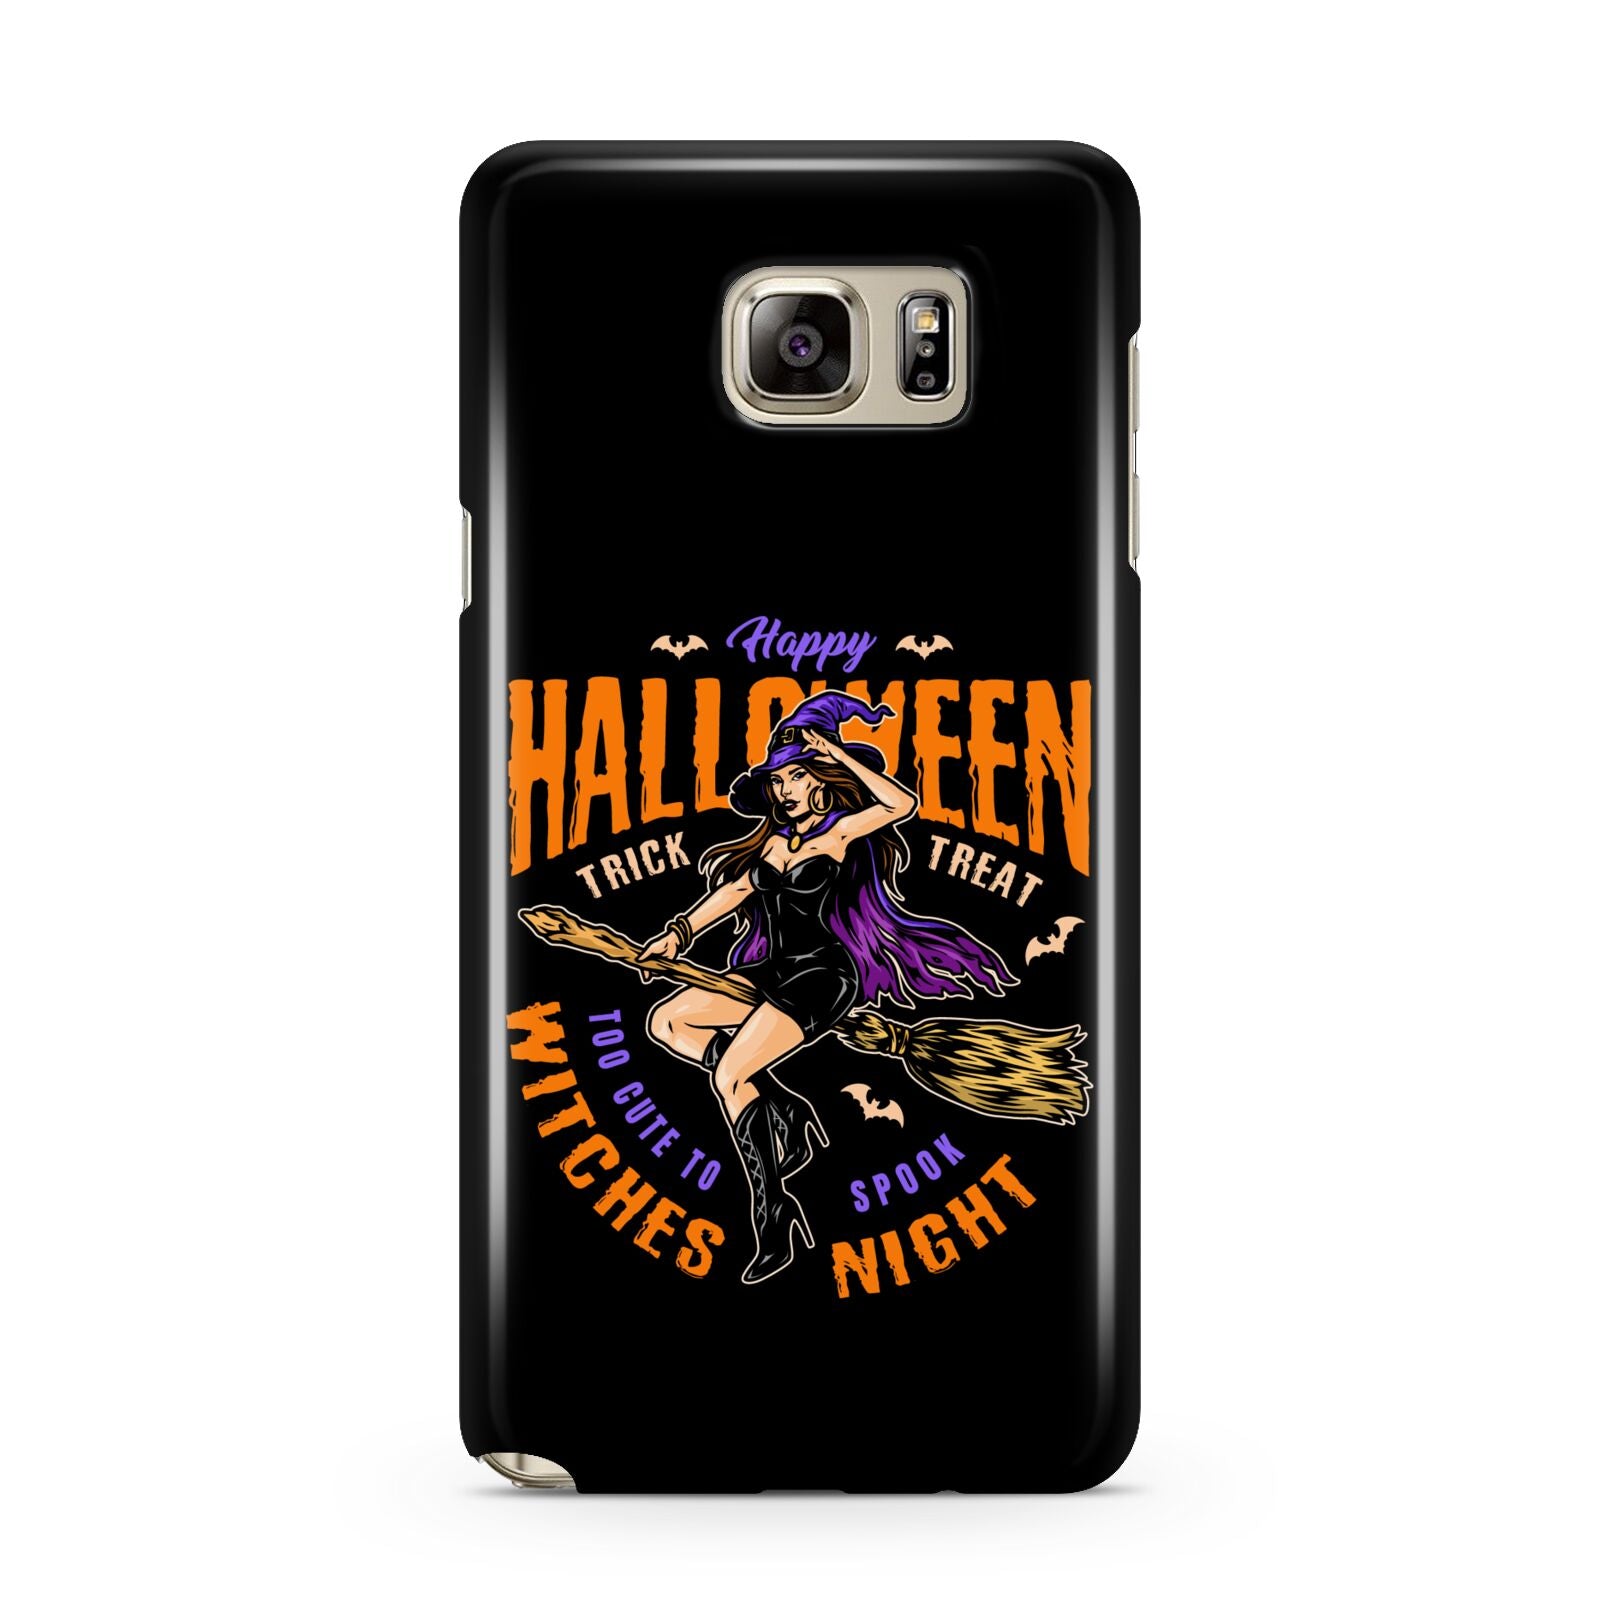 Witches Night Samsung Galaxy Note 5 Case